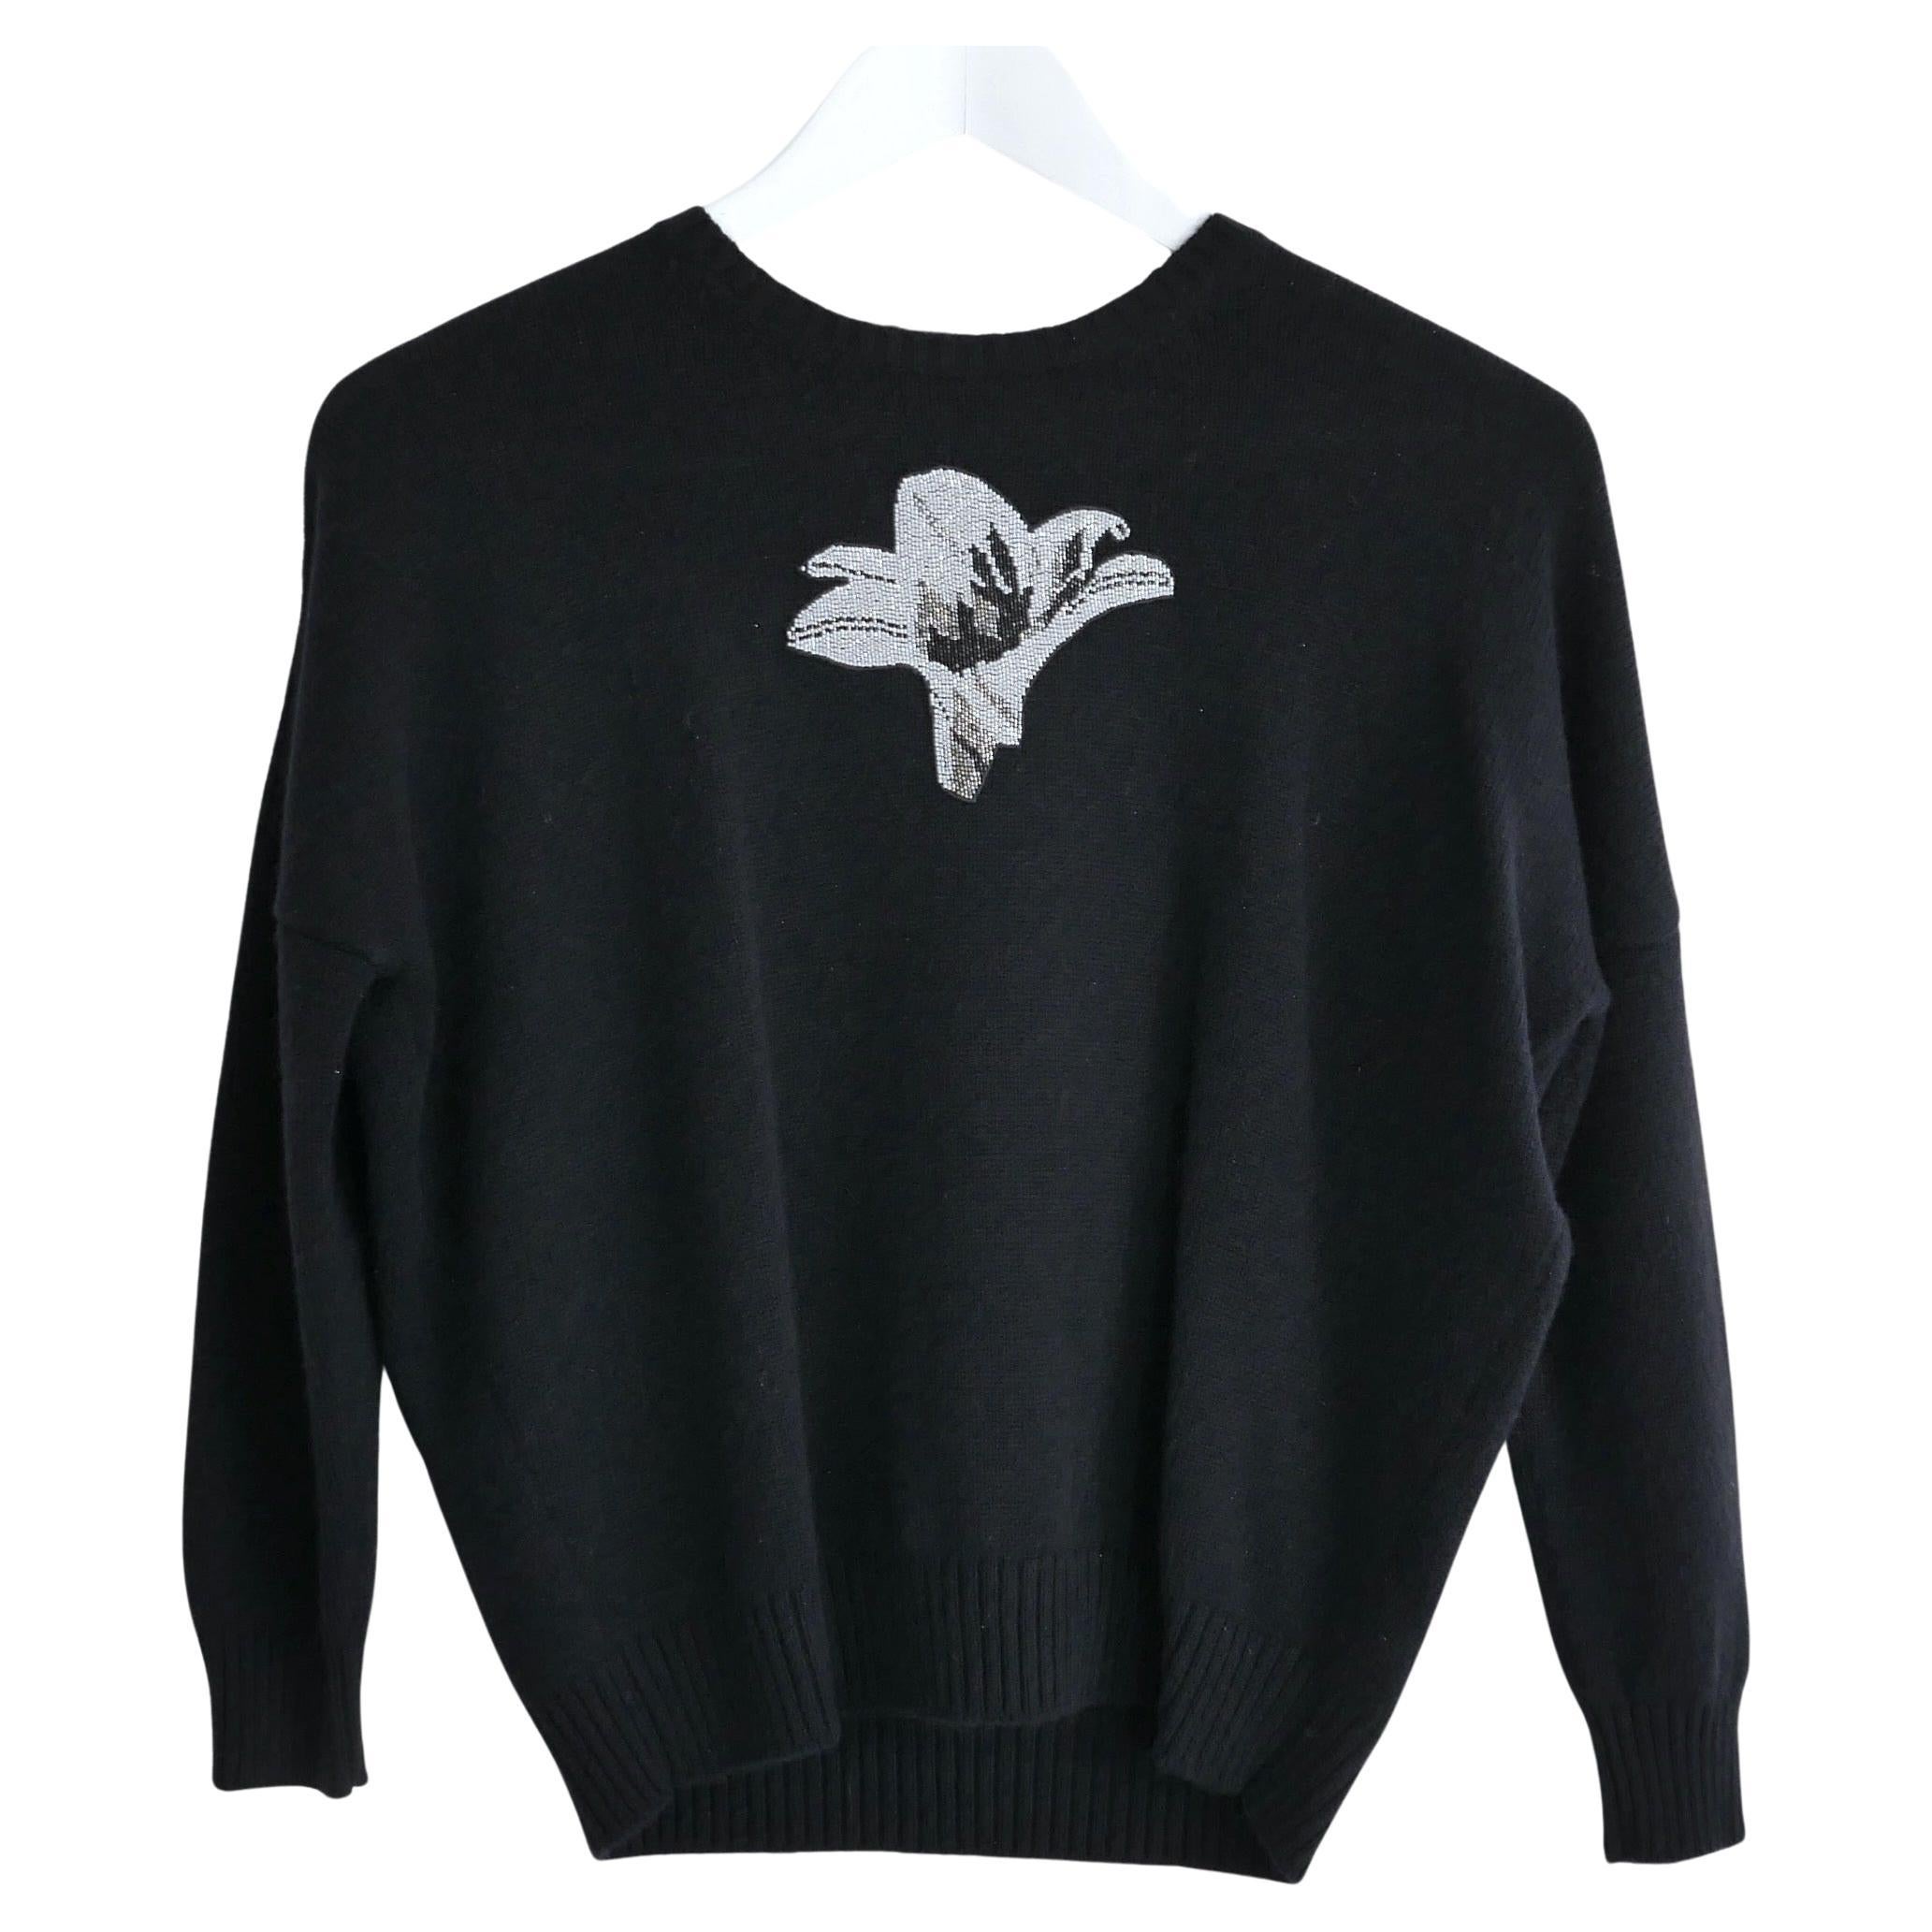 Dior x Raf Simons Pre-Fall '14 Lily Beaded Cashmere Jumper For Sale